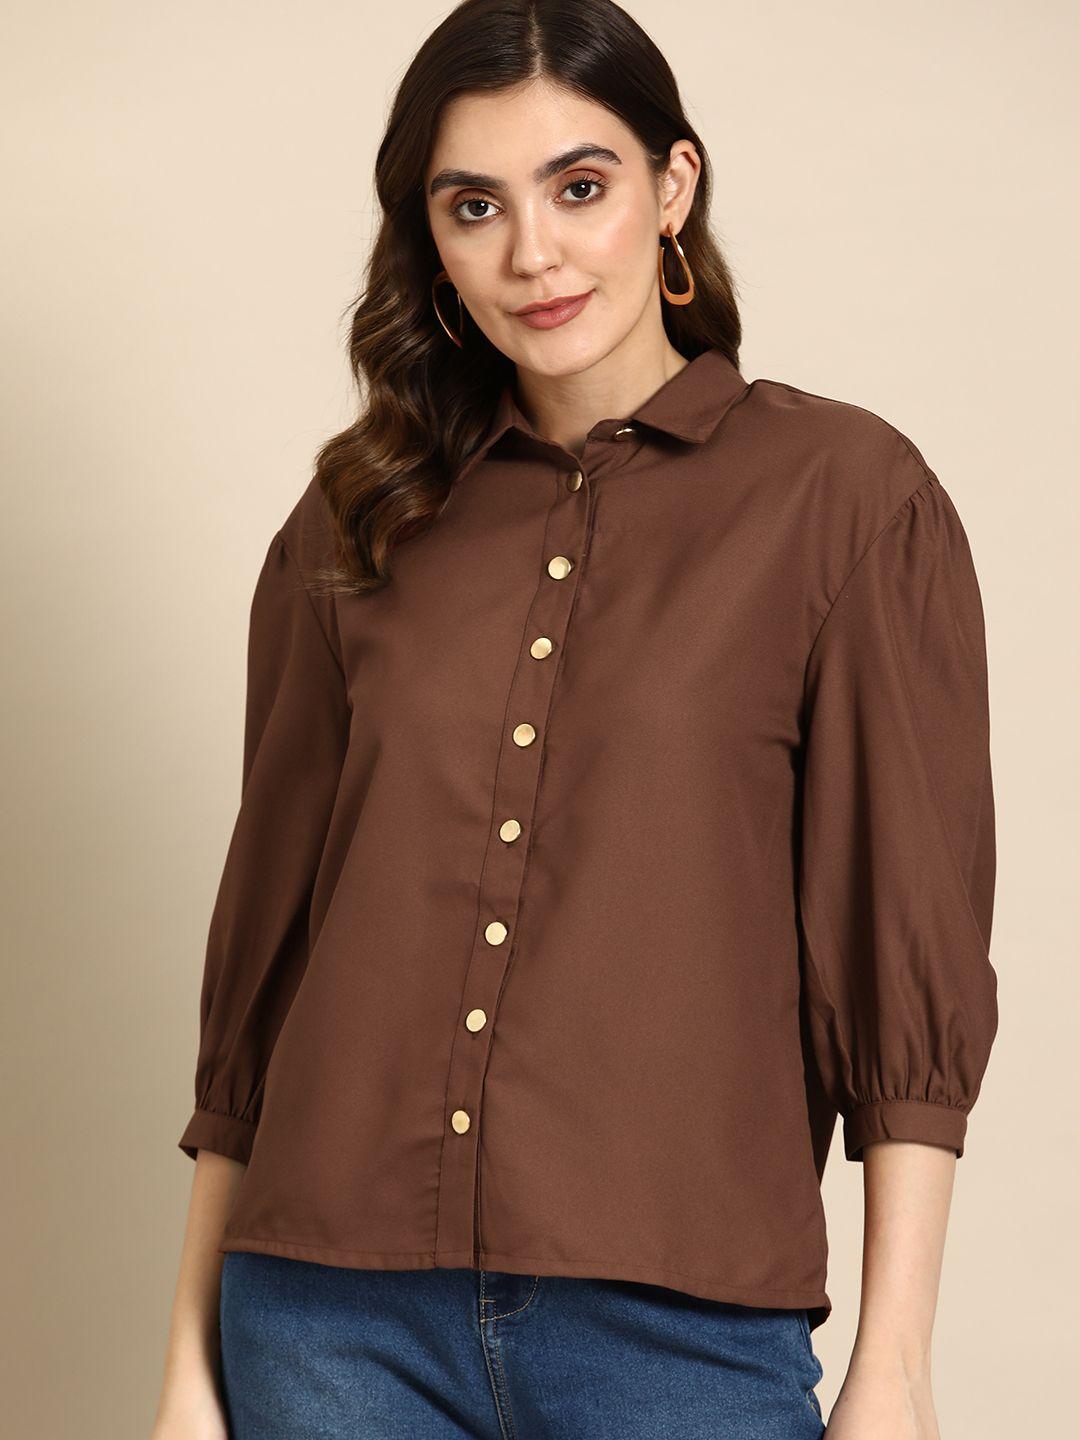 all-about-you-women-puff-sleeves-opaque-casual-shirt